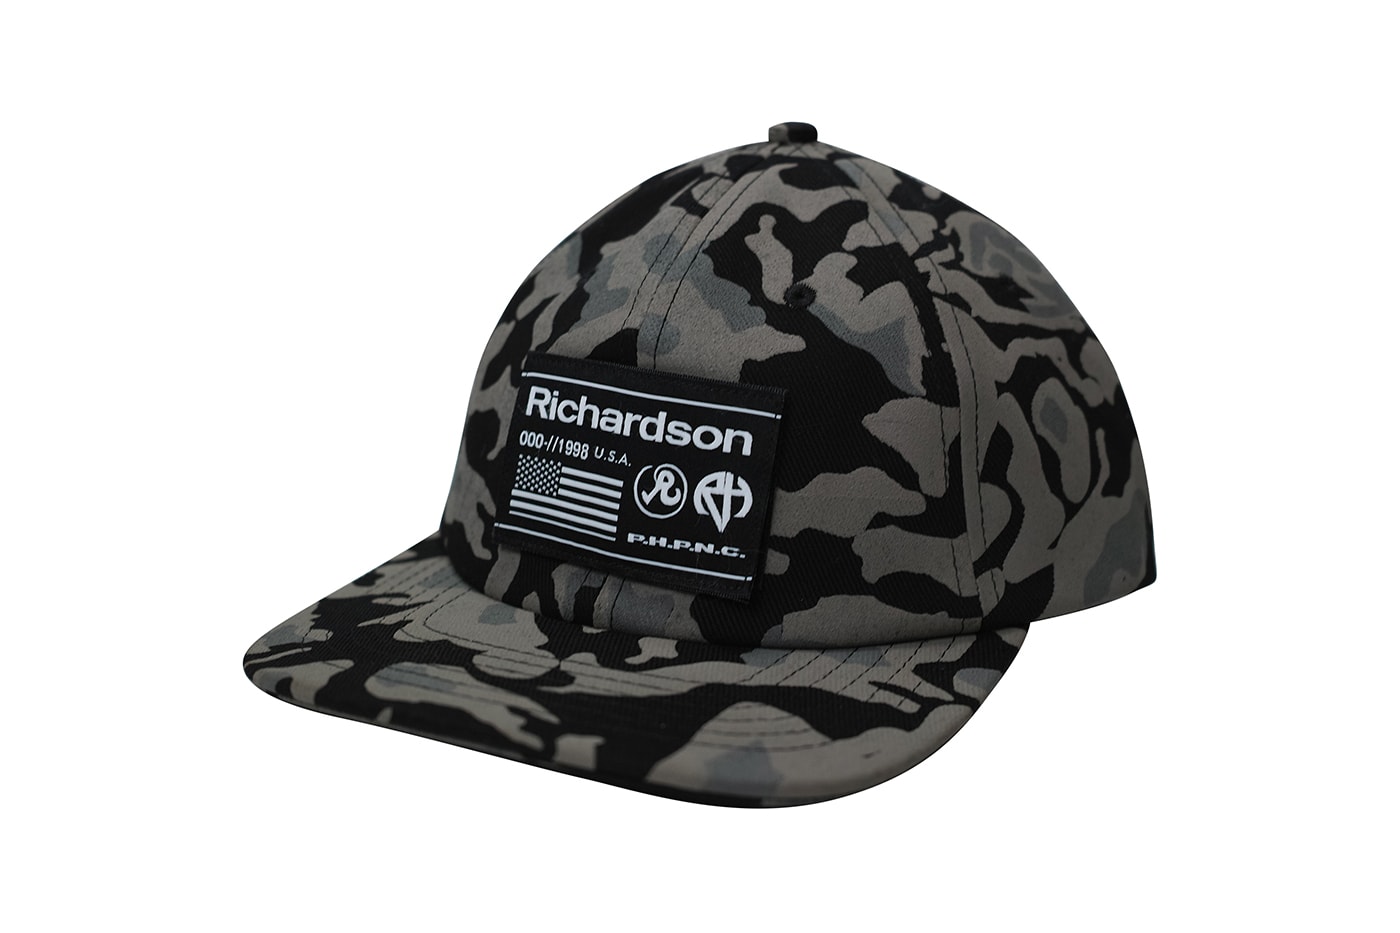 Richardson Military Inspired Fall Winter 2019 Collection drop capsule army surplus quantico Fort Bragg North Carolina virginia eagle industries